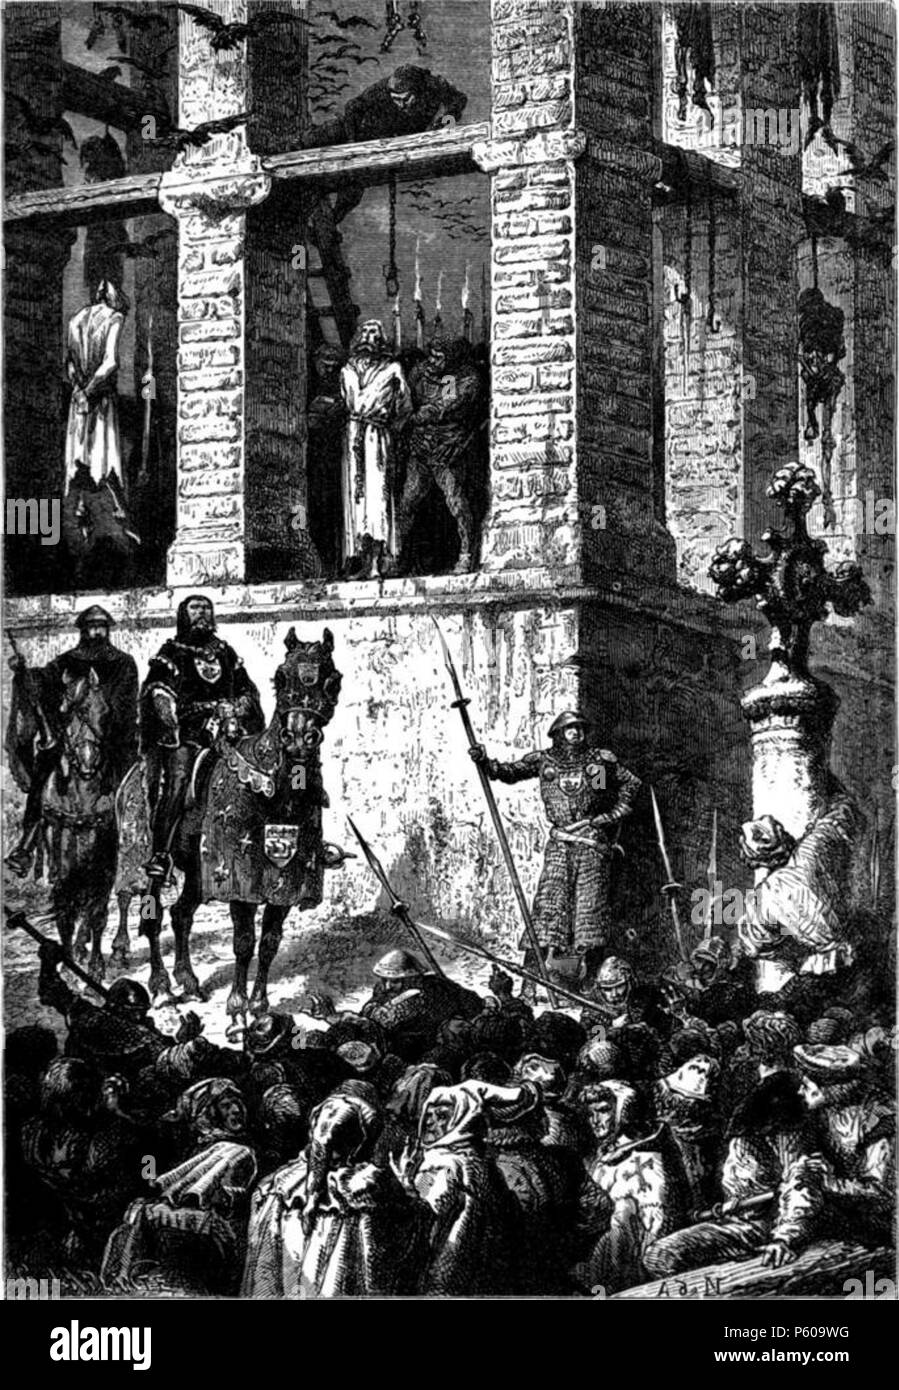 N/A. The Execution of Enguerrand de Marigny (1260-1315), hanged on the public gallows at Montfaucon, Paris, France . 1883.   Alphonse de Neuville  (1836–1885)     Alternative names Alphonse de Neuville  Description French painter  Date of birth/death 31 May 1836 19 May 1885  Location of birth/death Saint-Omer Paris  Work location Paris  Authority control  : Q1494309 VIAF:78770367 ISNI:0000 0001 2321 1116 ULAN:500024298 LCCN:nr91017095 NLA:35220290 WorldCat 538 ExecutionMarigny Stock Photo